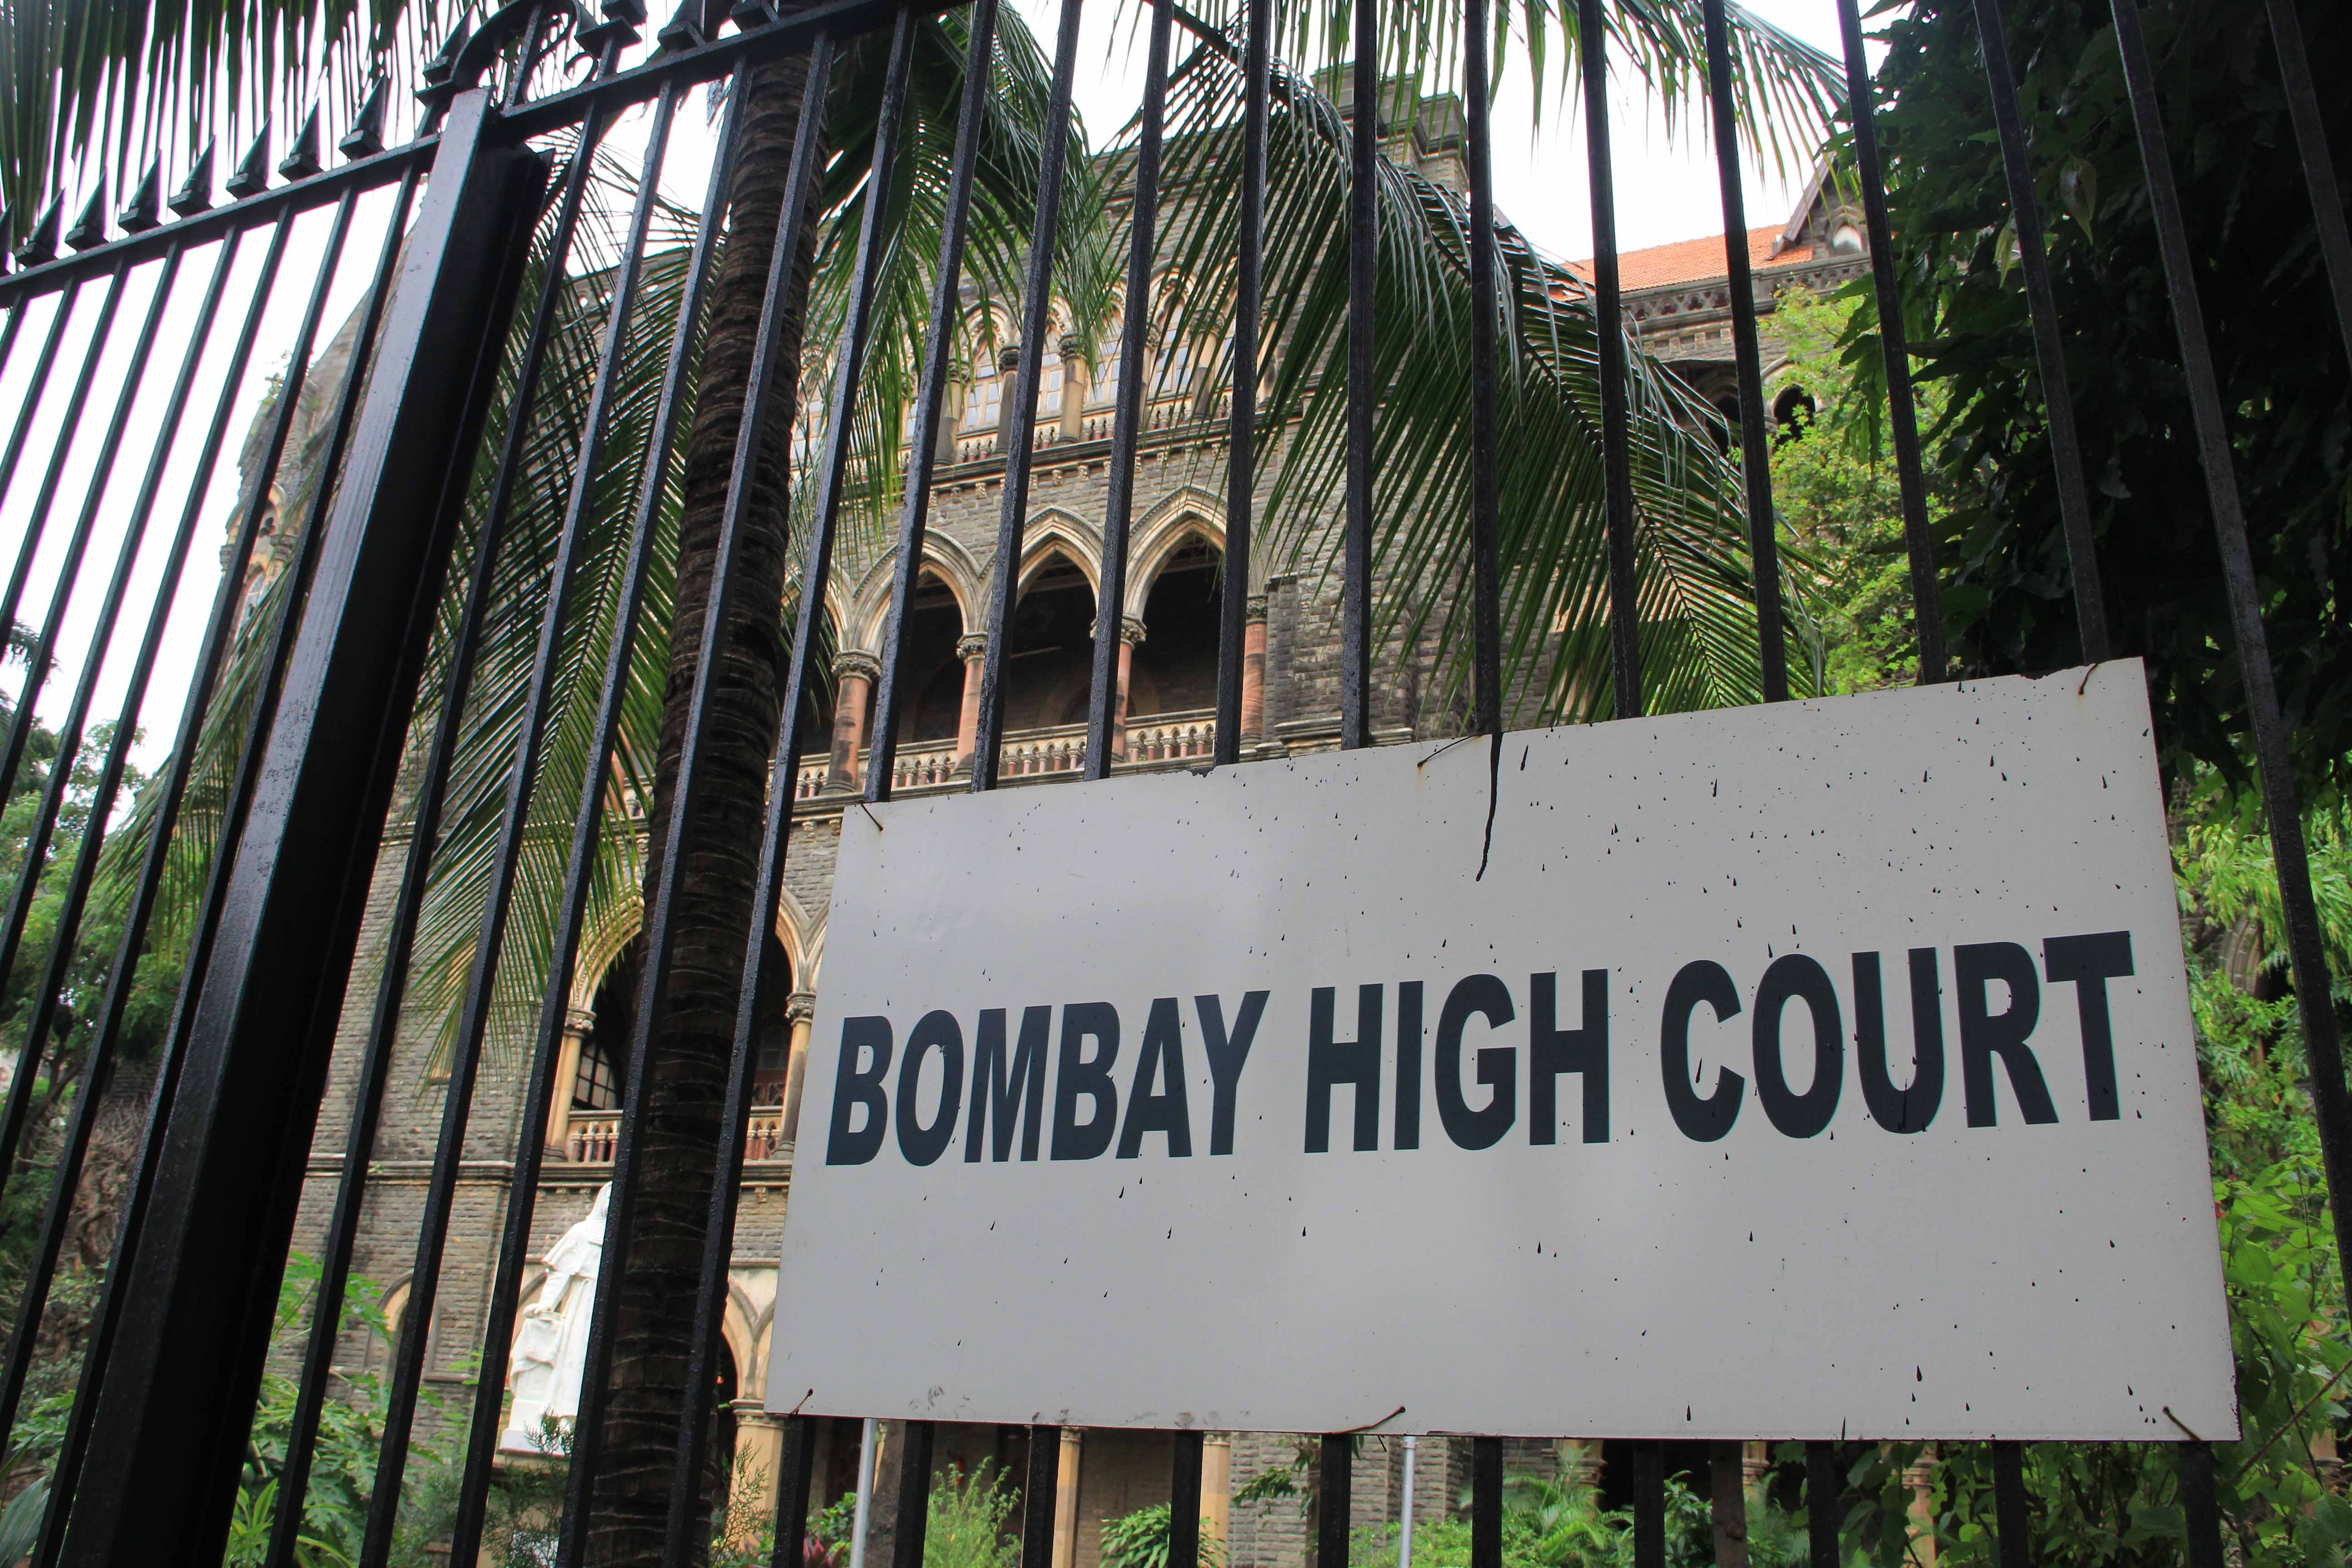 A view of the Bombay High Court